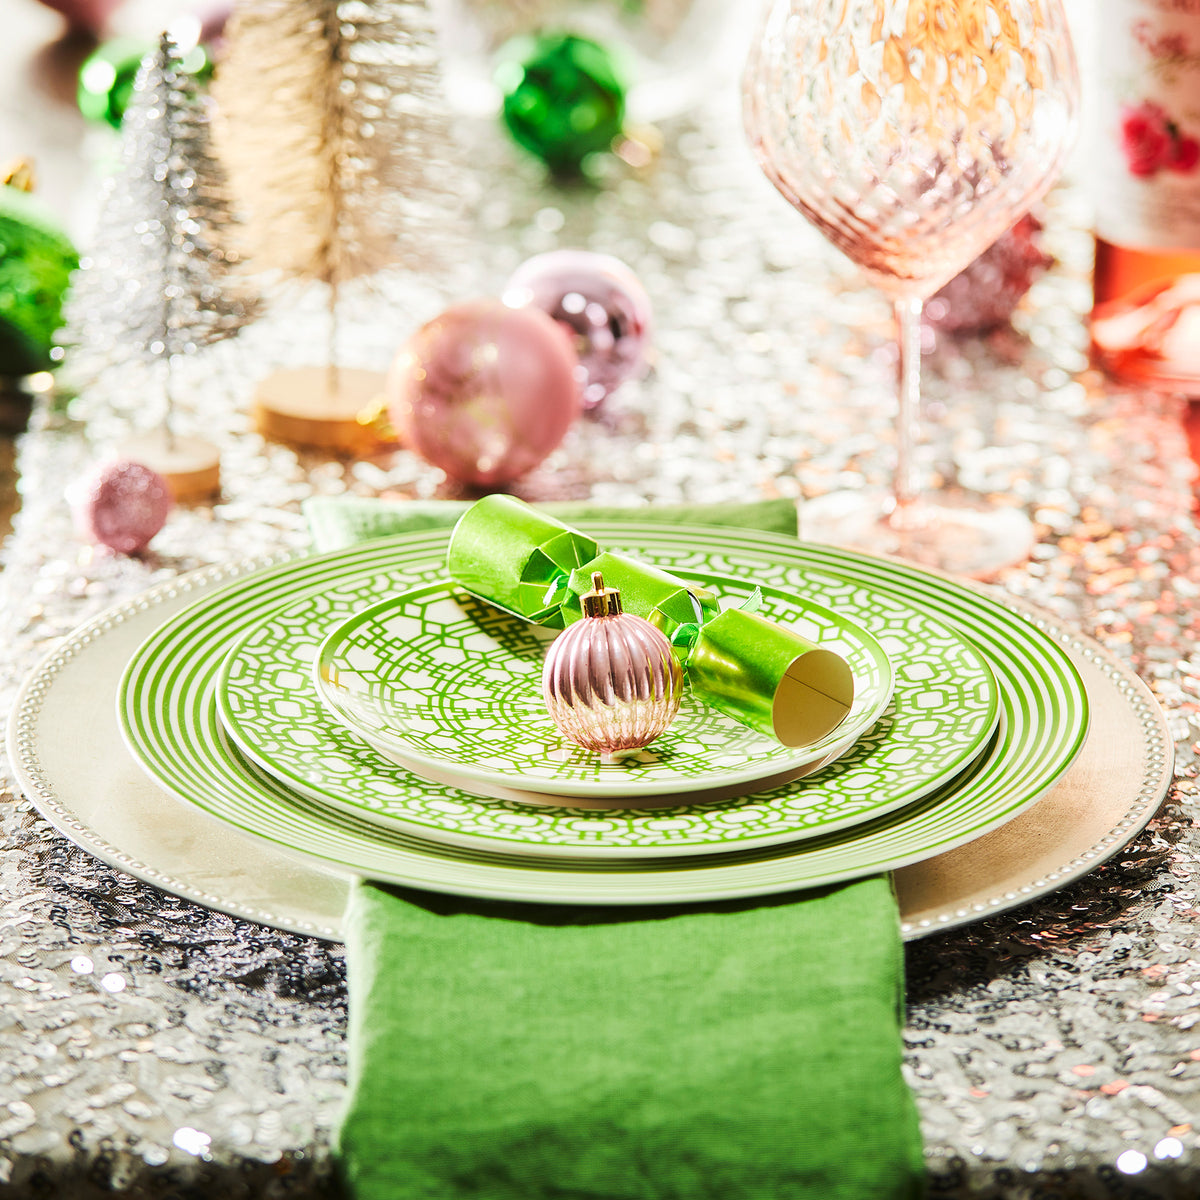 Festive table setting with Newport Stripe Verde Rimmed Dinner Plate by Caskata Artisanal Home, a green napkin, Christmas cracker, and pink ornament on a sparkling tablecloth, surrounded by holiday decorations.